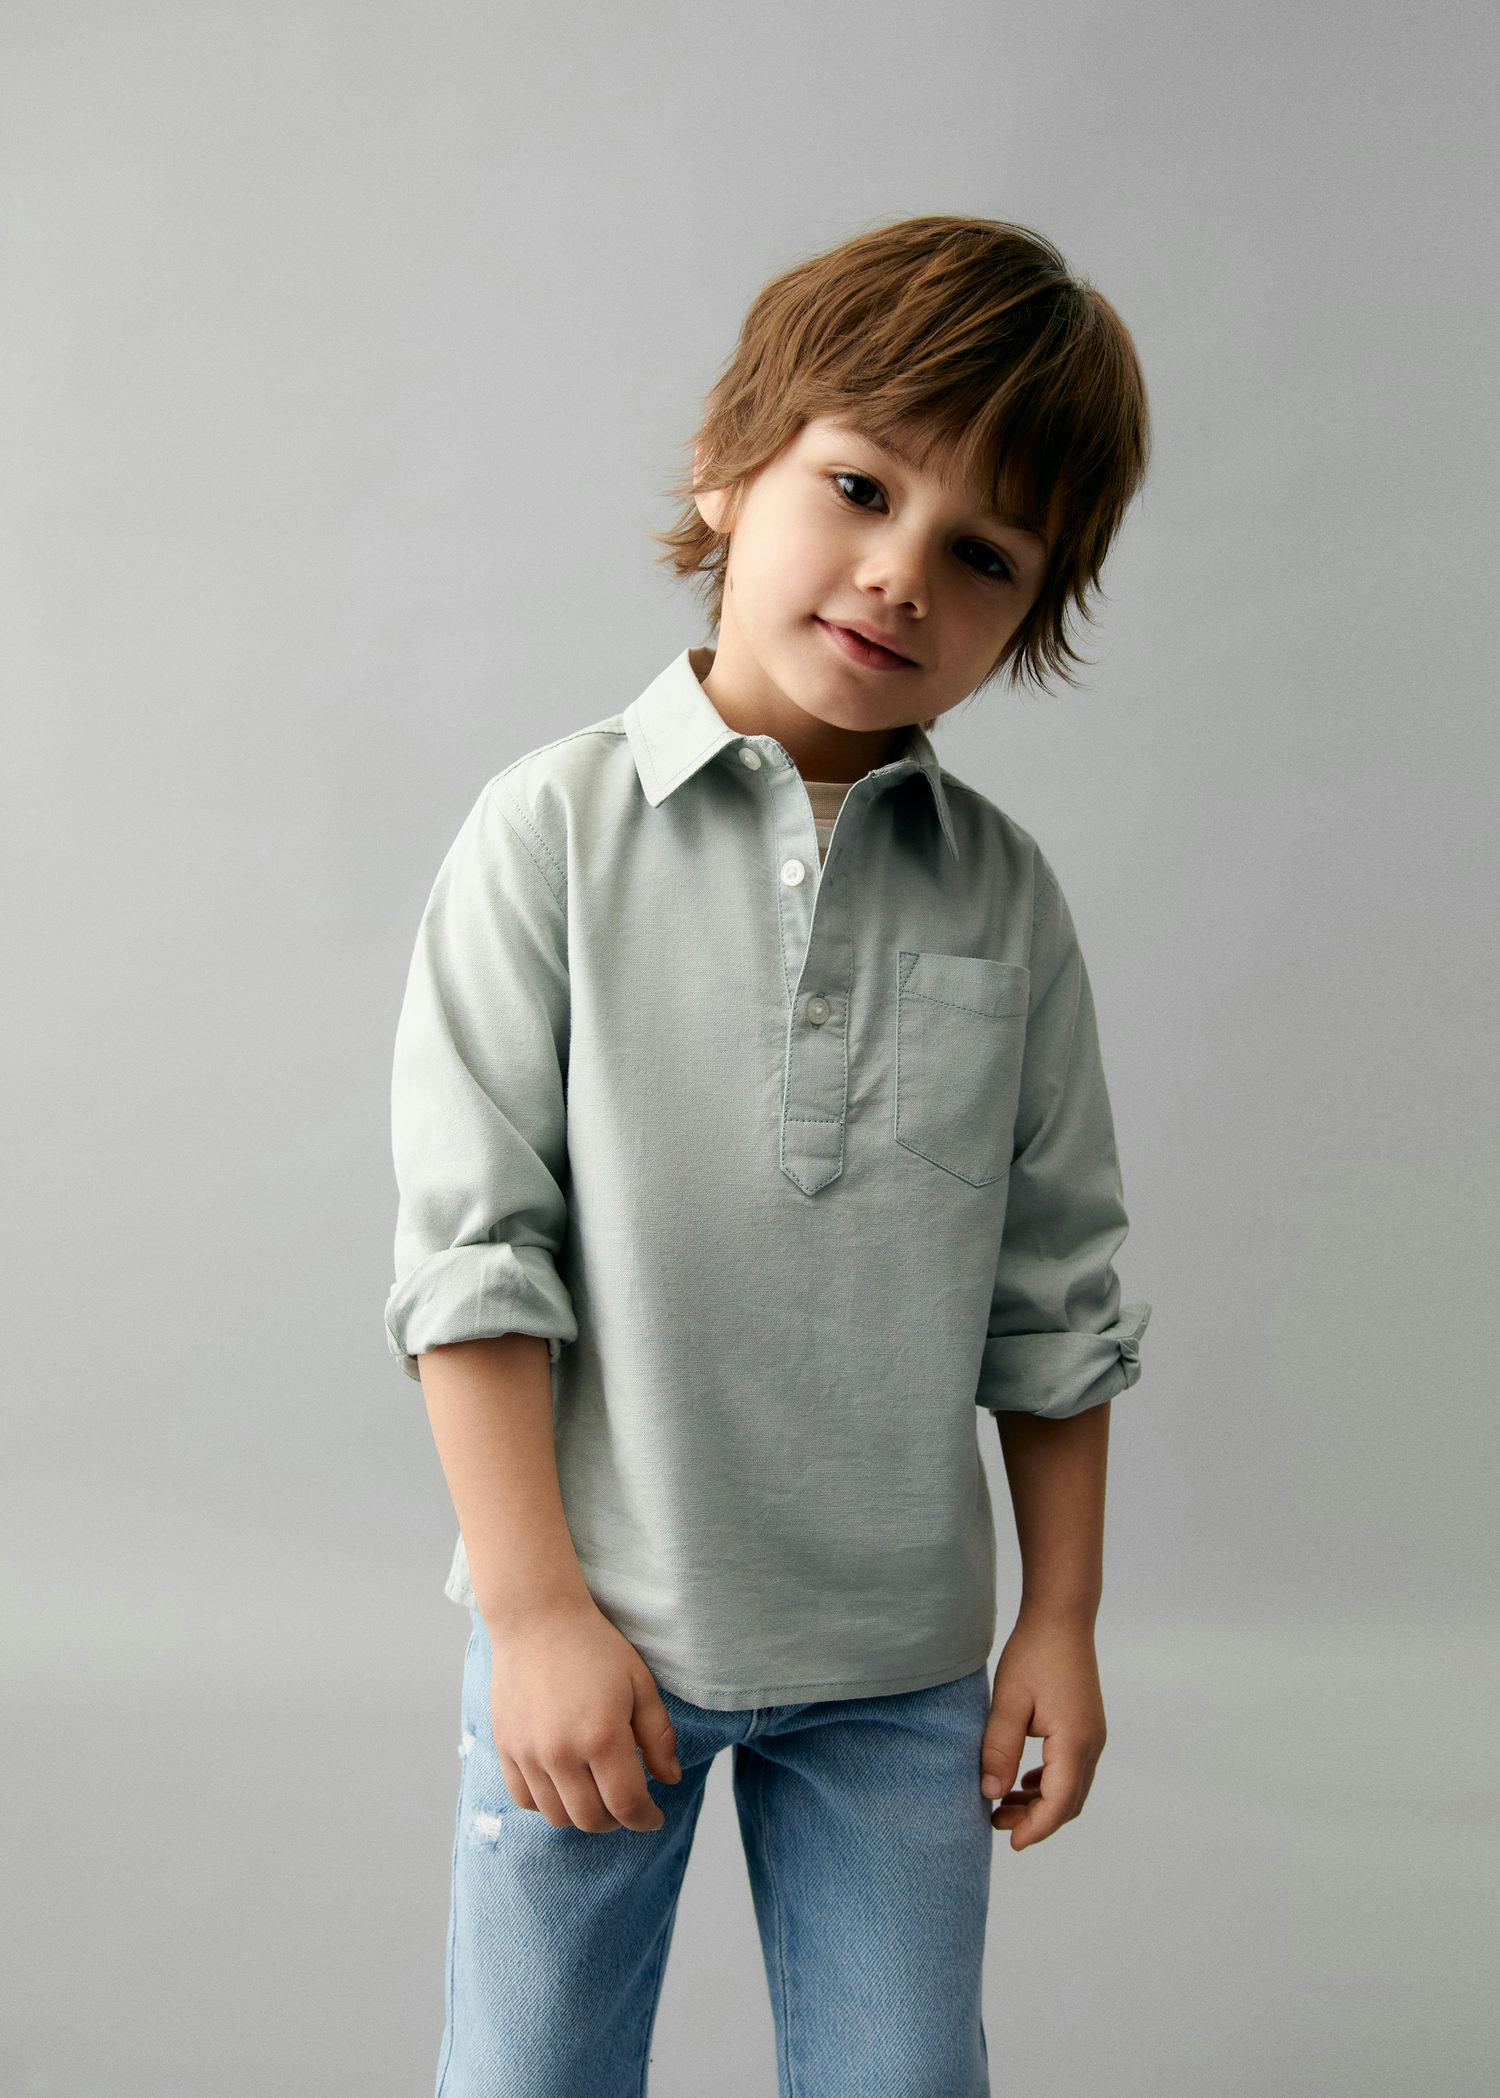 Kidz Management for Mango cover picture